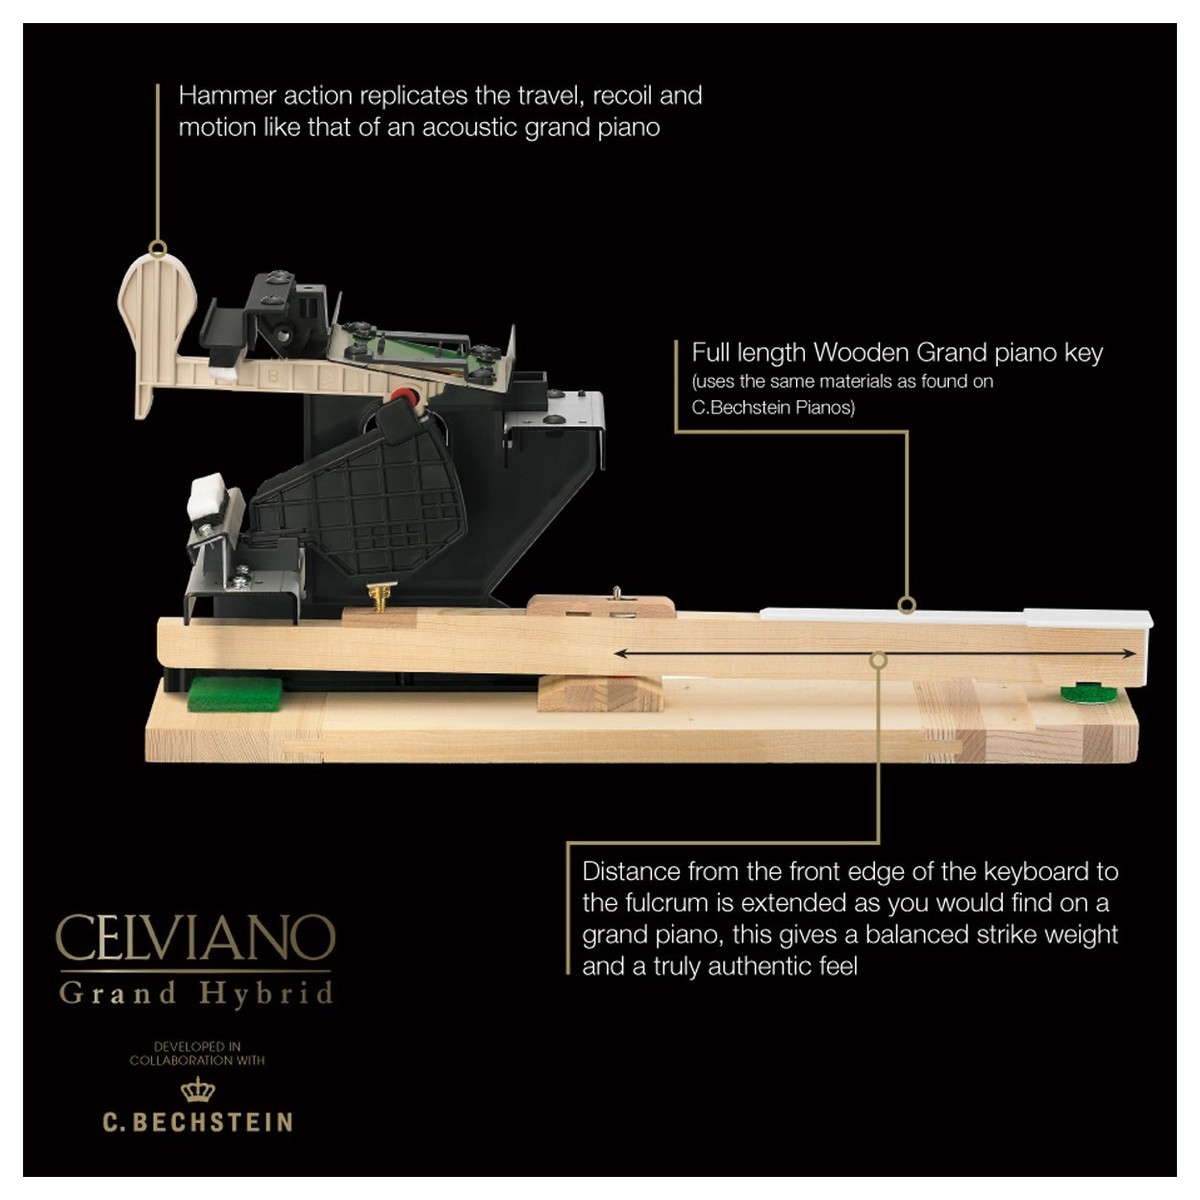 Celviano grand hammer cross section